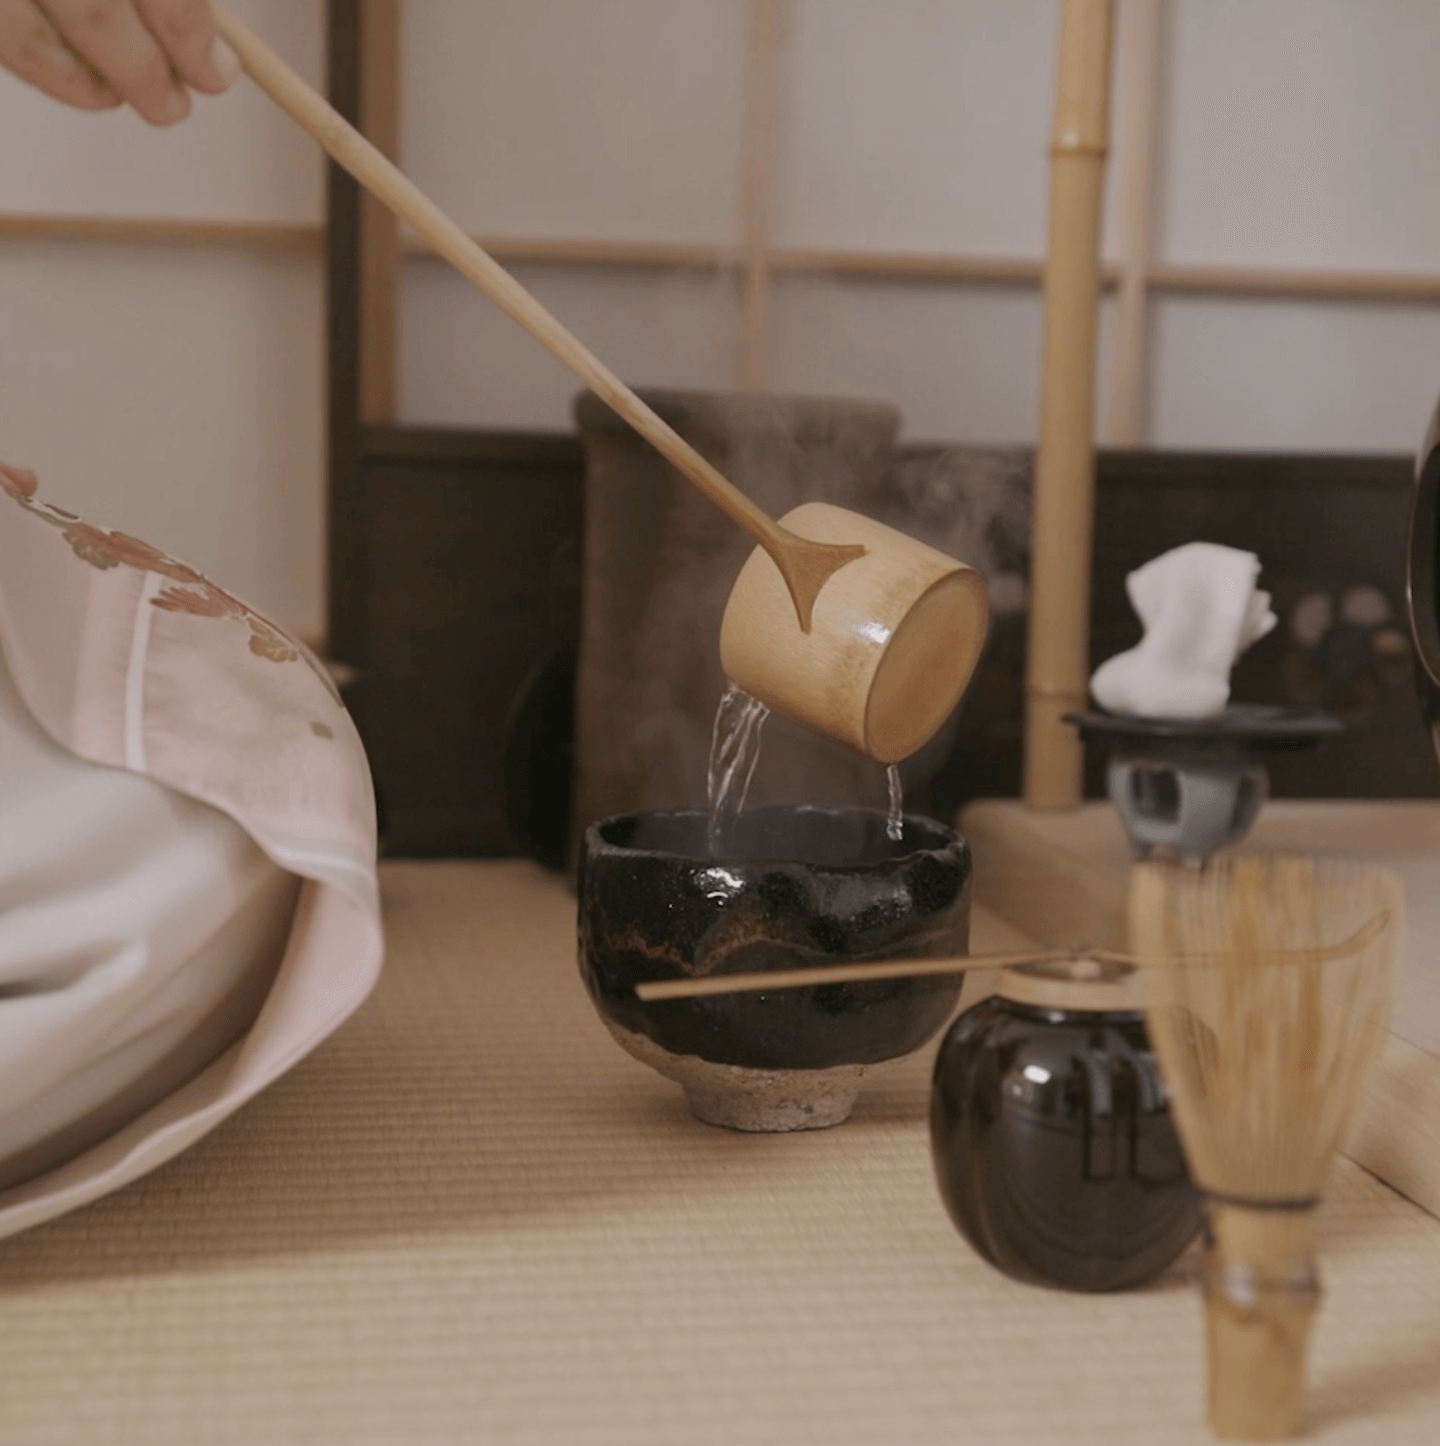 5 HABITS THE REST OF THE WORLD CAN LEARN FROM JAPANESE CULTURE - sorate